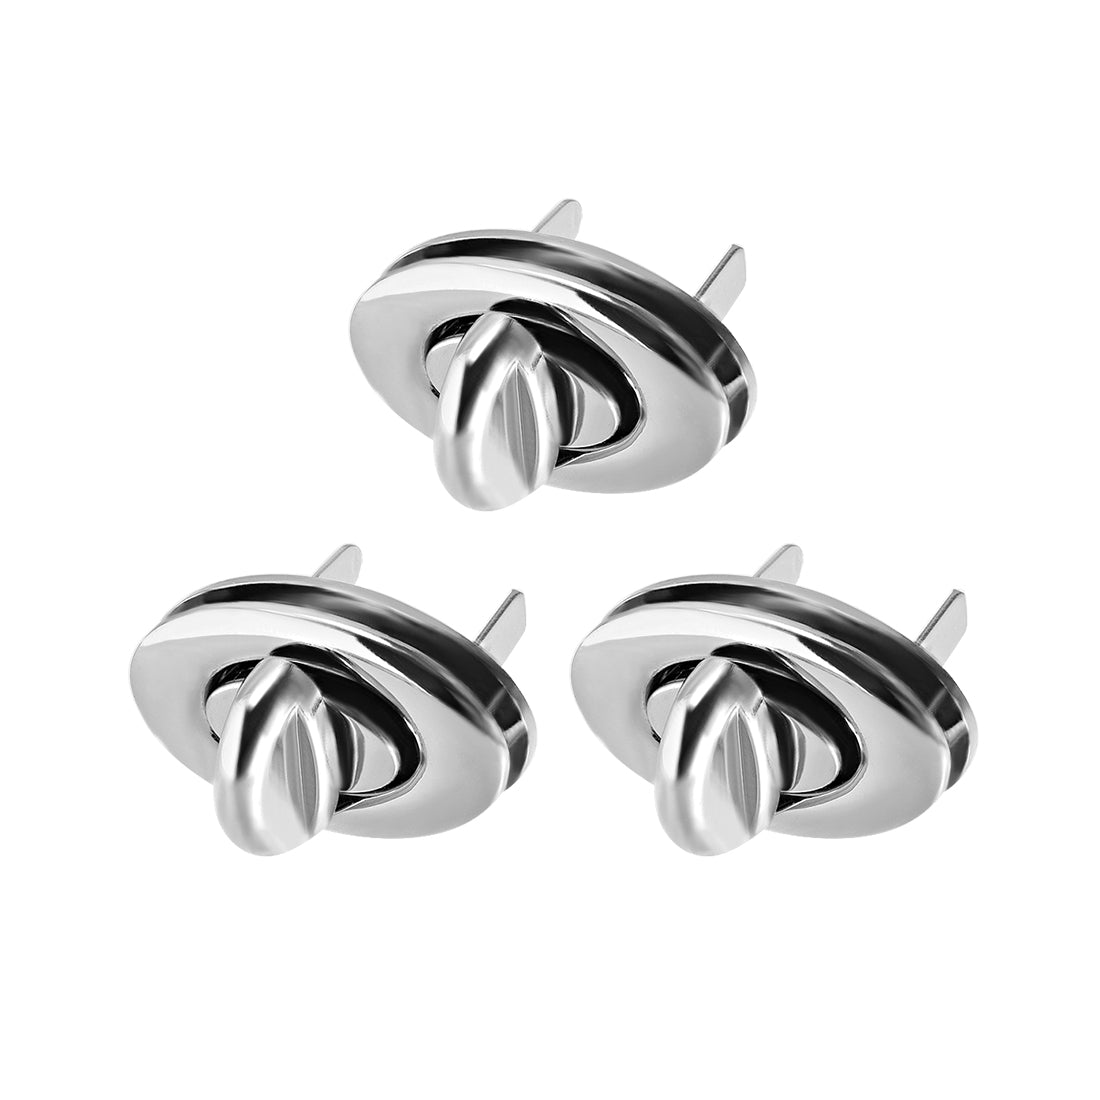 uxcell Uxcell 3 Sets Oval Purses Twist Lock 33mm x 19mm Clutches Closures for DIY Bag Making - Silver